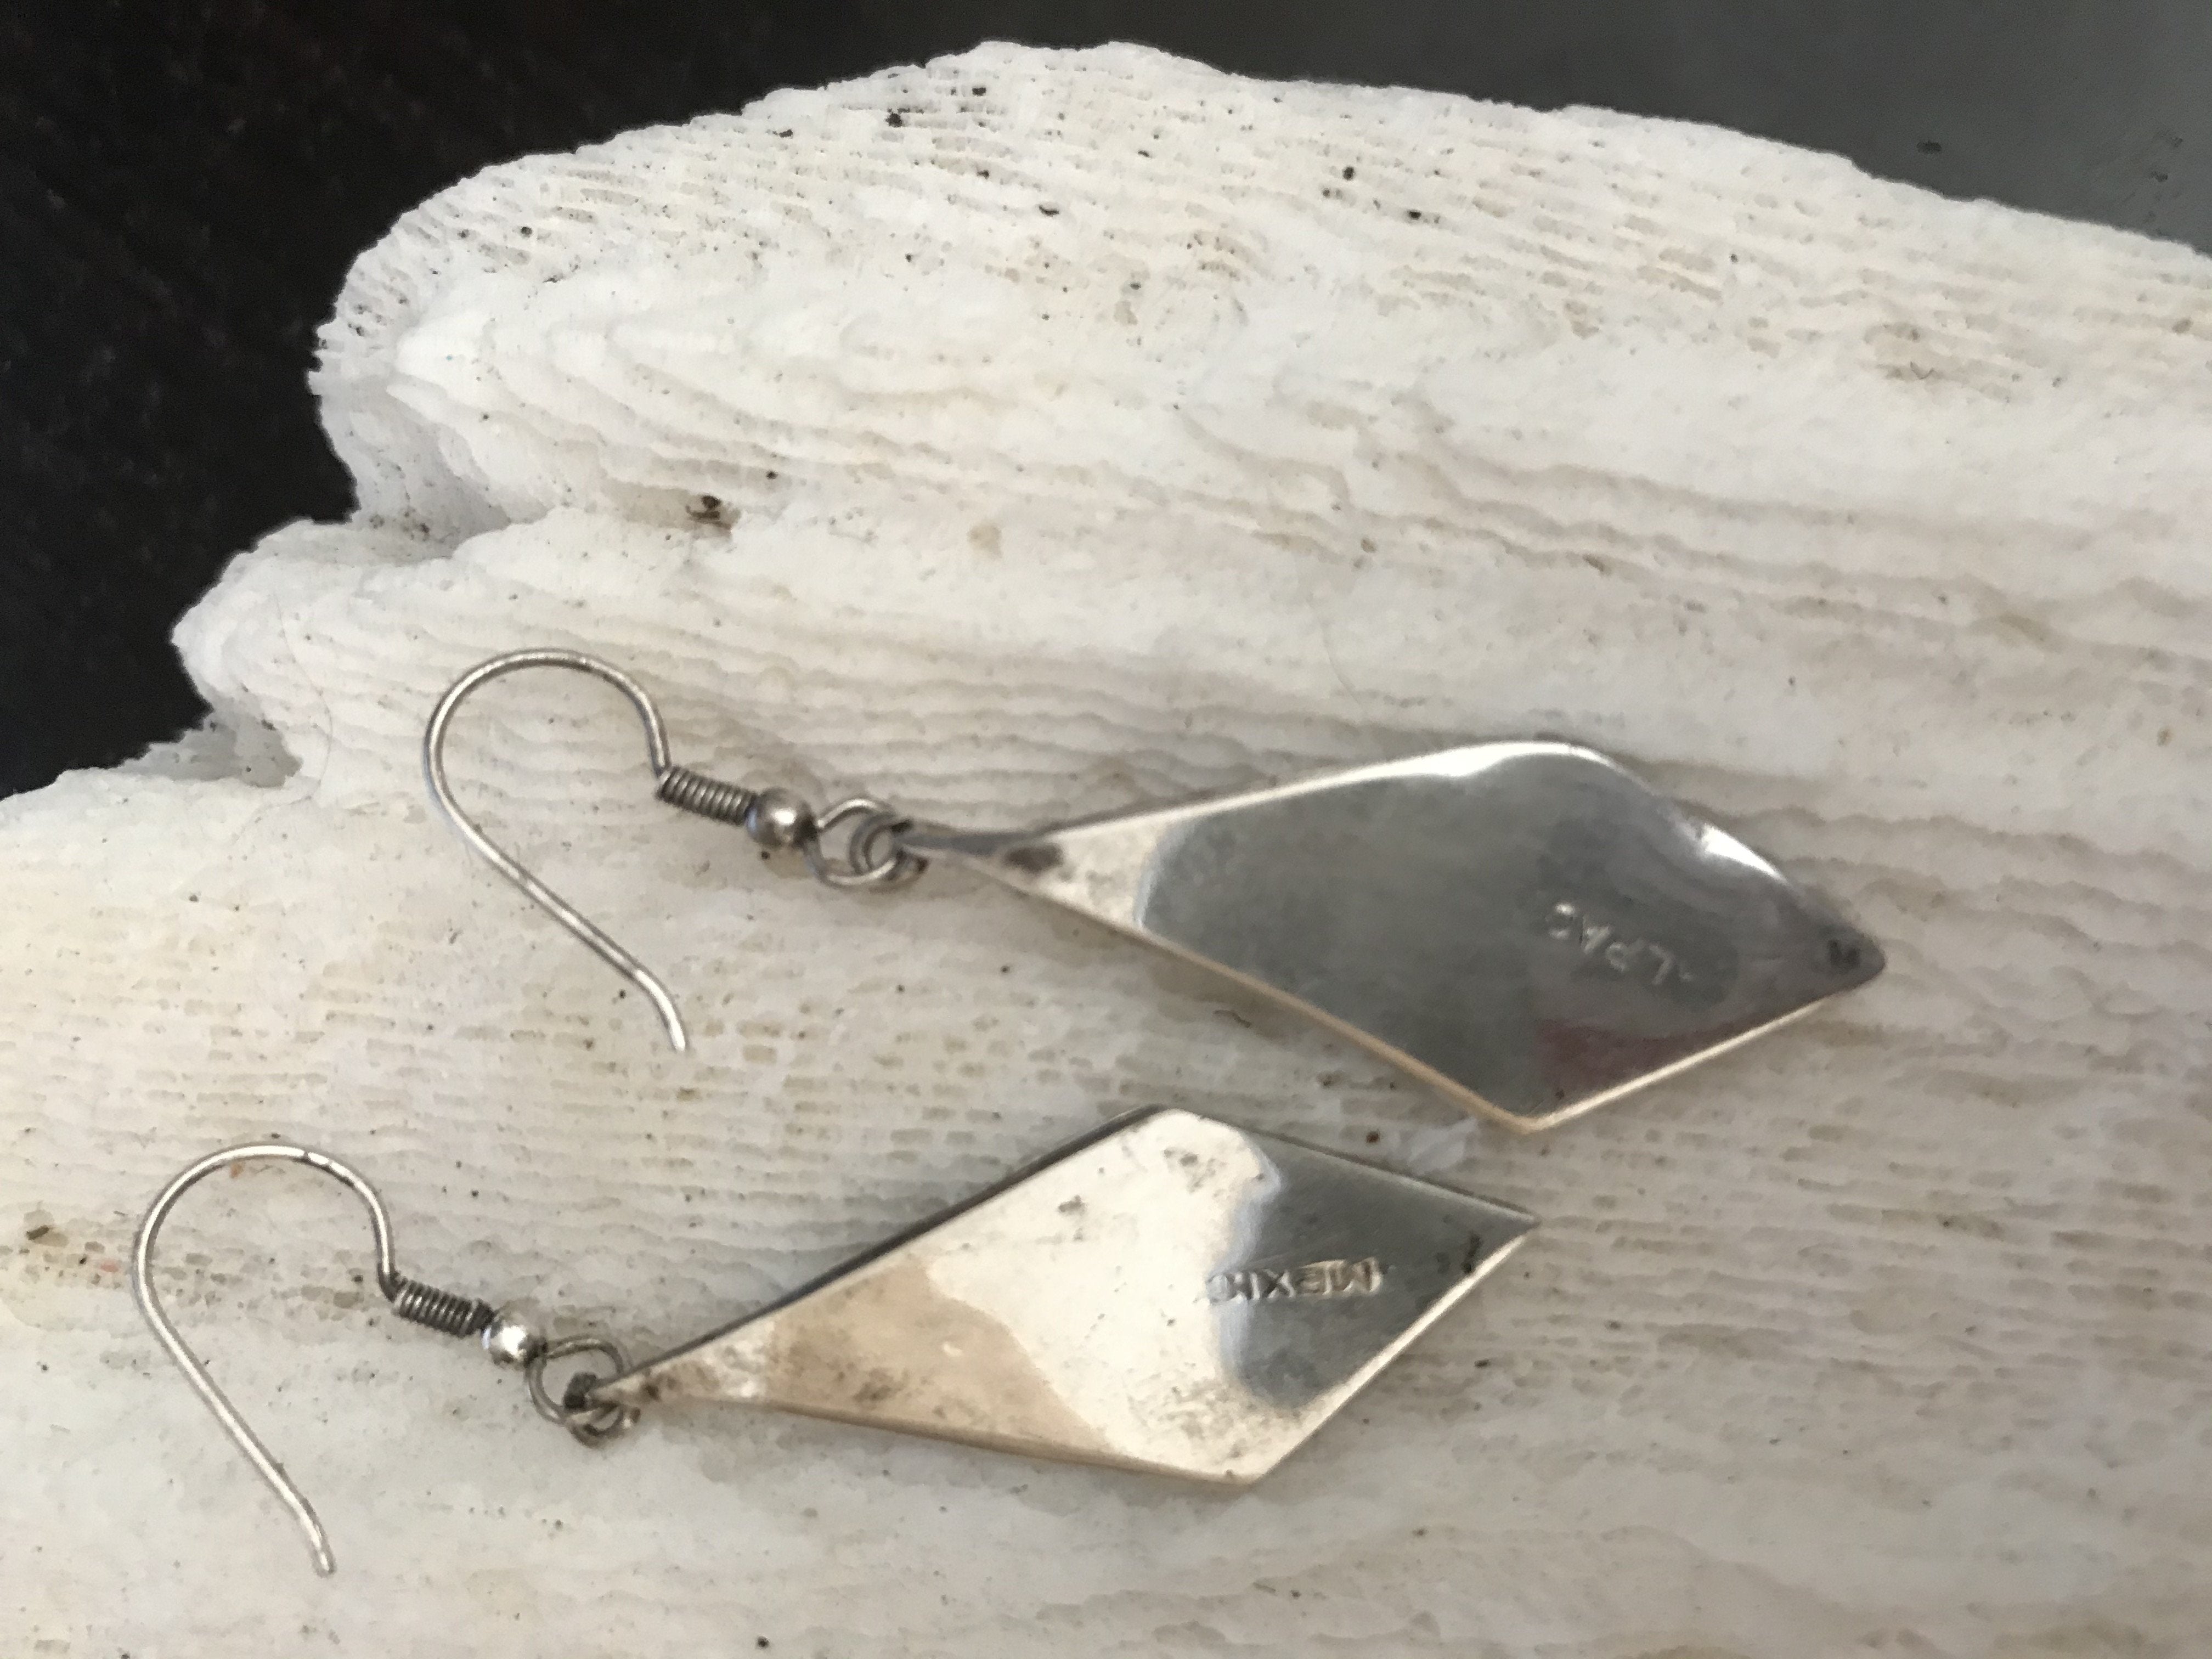 Mexican Sterling Silver Abalone Inlaid Quadrilateral Triangle Earrings - Shop Thrifty Treasures